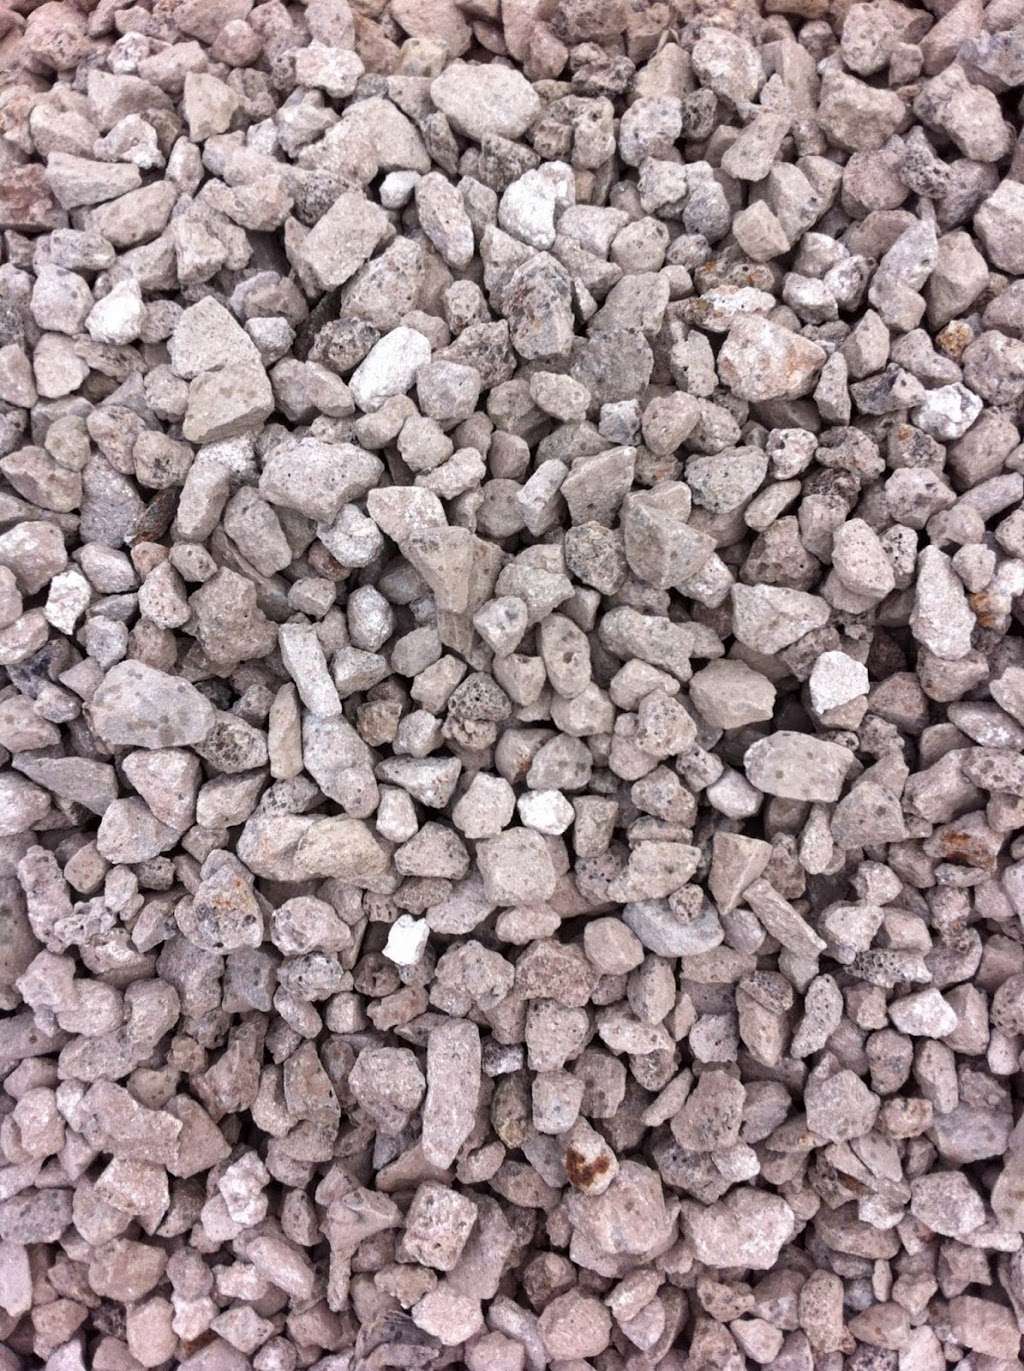 Total Recycling Quarry: Crushed Concrete Blacktop Millings Slag  | 1820 N Dauphin St, Allentown, PA 18109 | Phone: (610) 266-0907